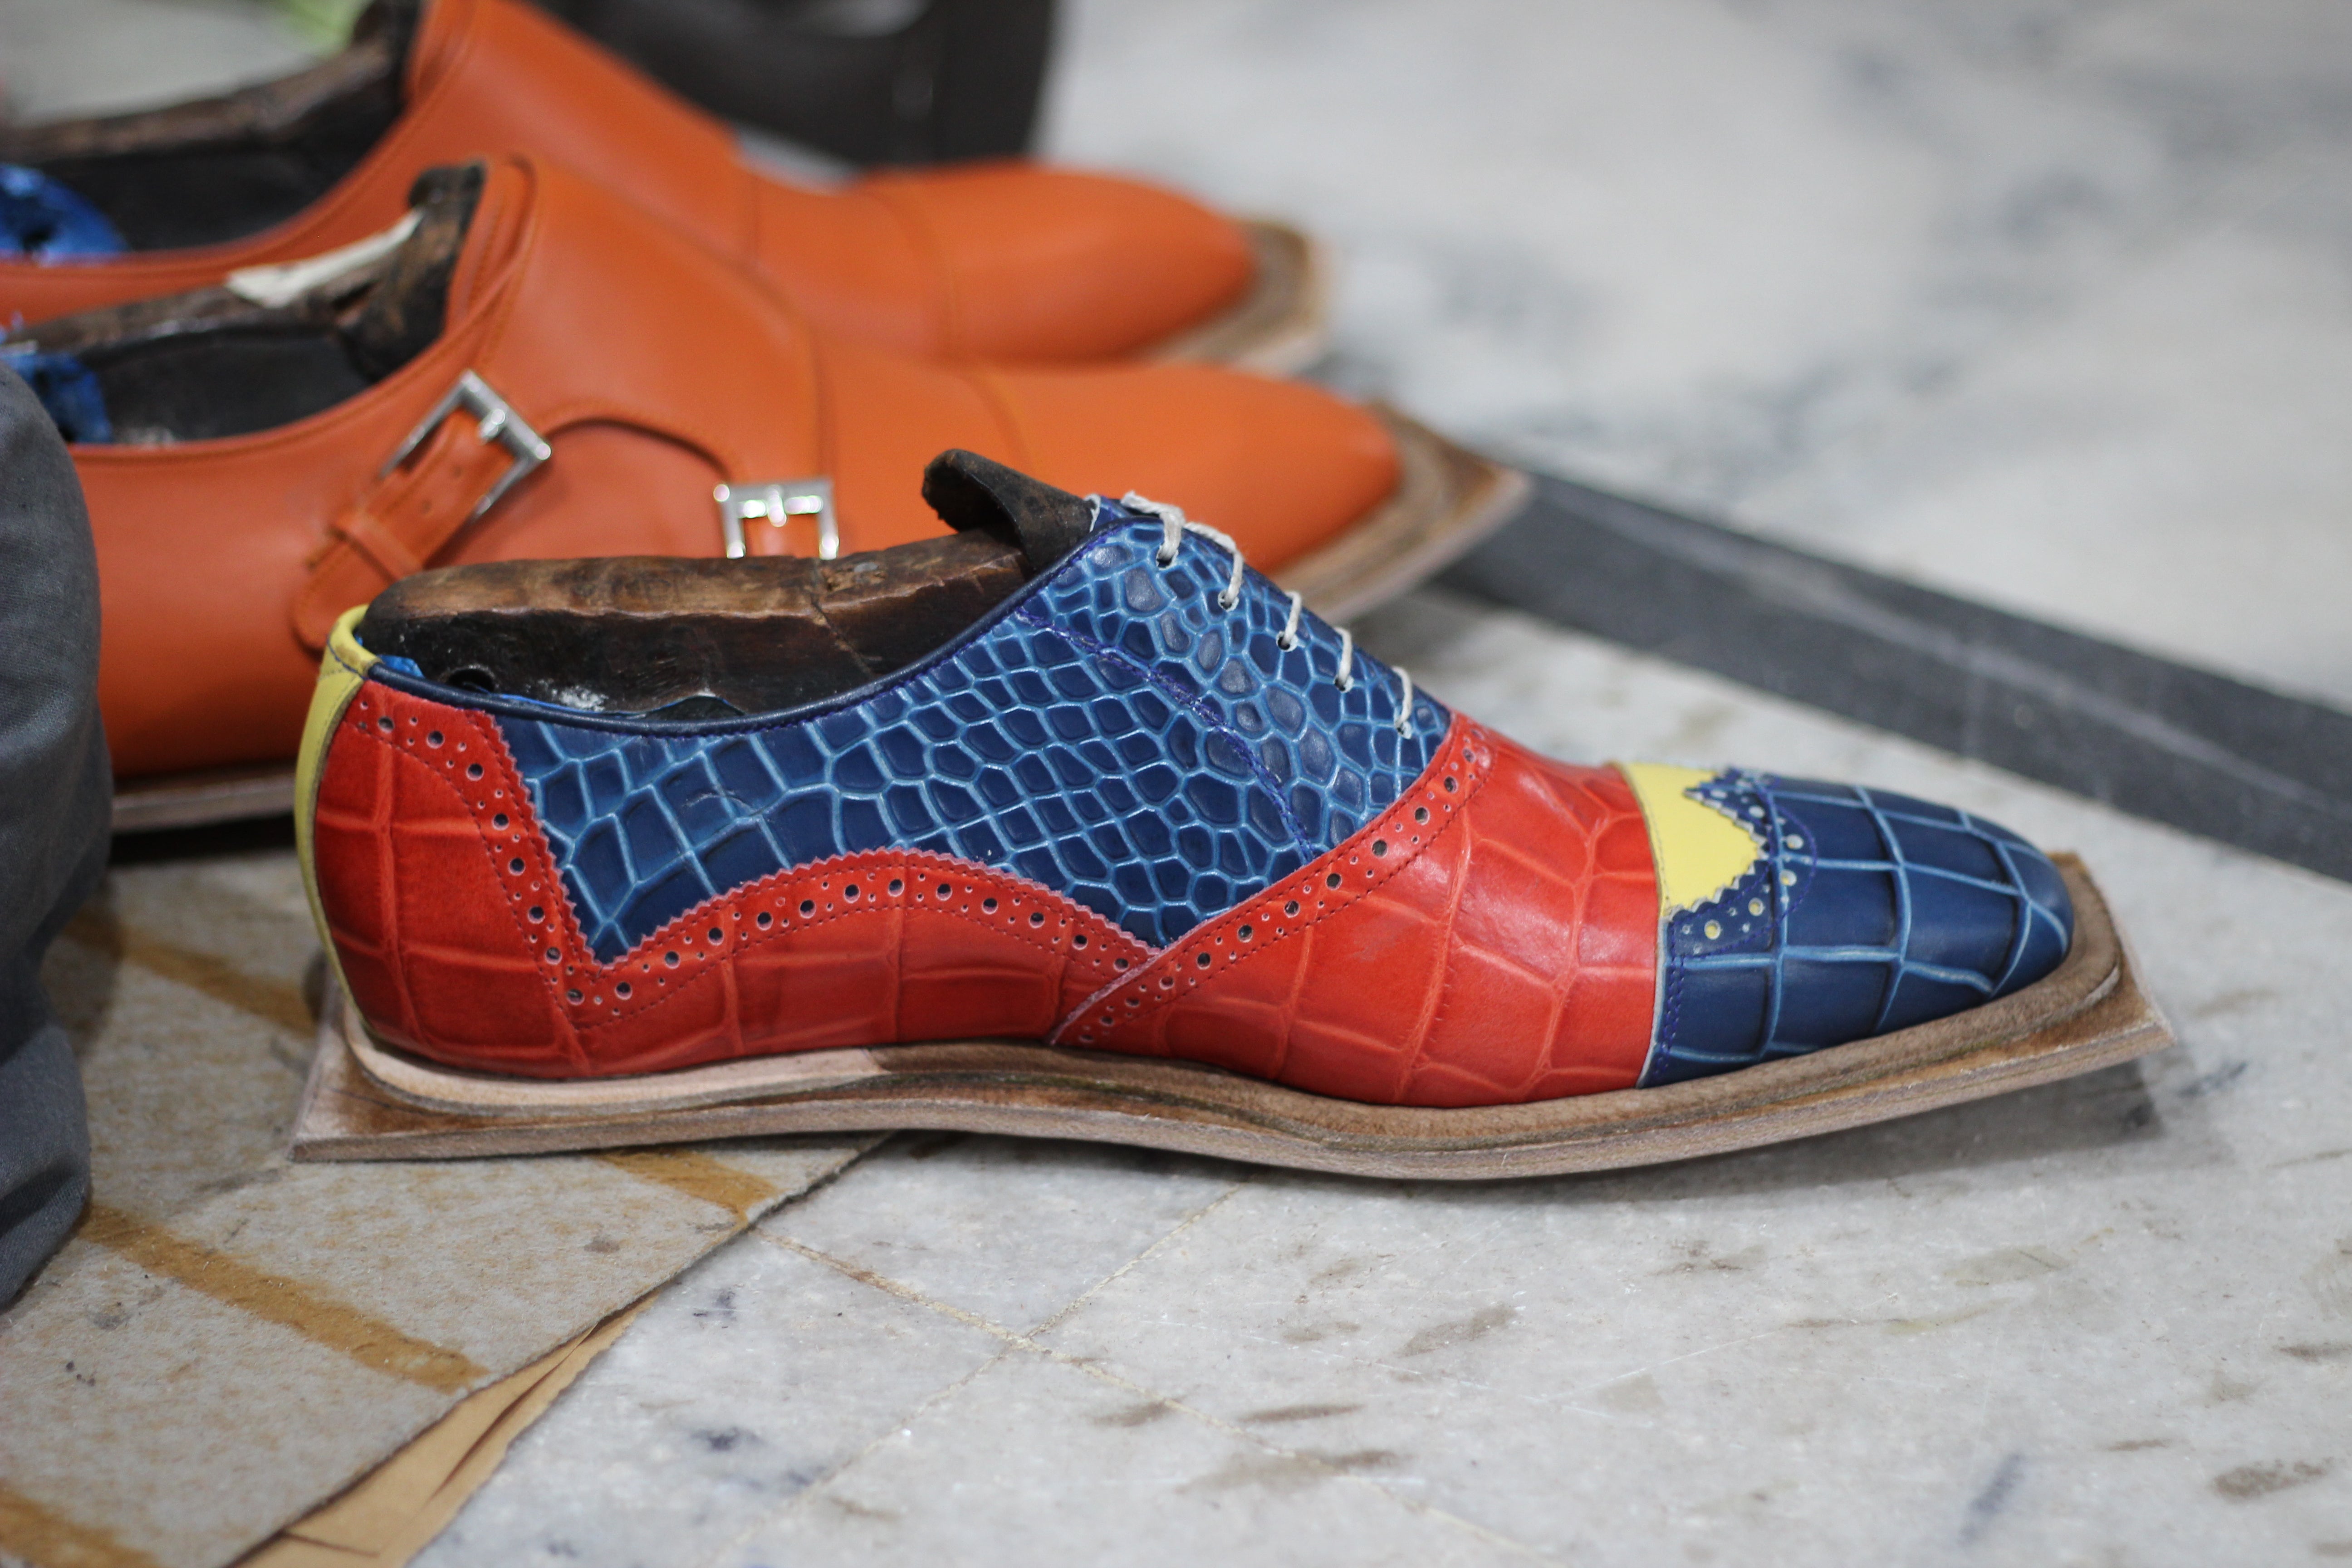 Handmade Men's Dress Shoes,  Red, Yellow, Blue Alligator Print Leather Oxford Wingtip Lace Up Stylish Men's Shoes